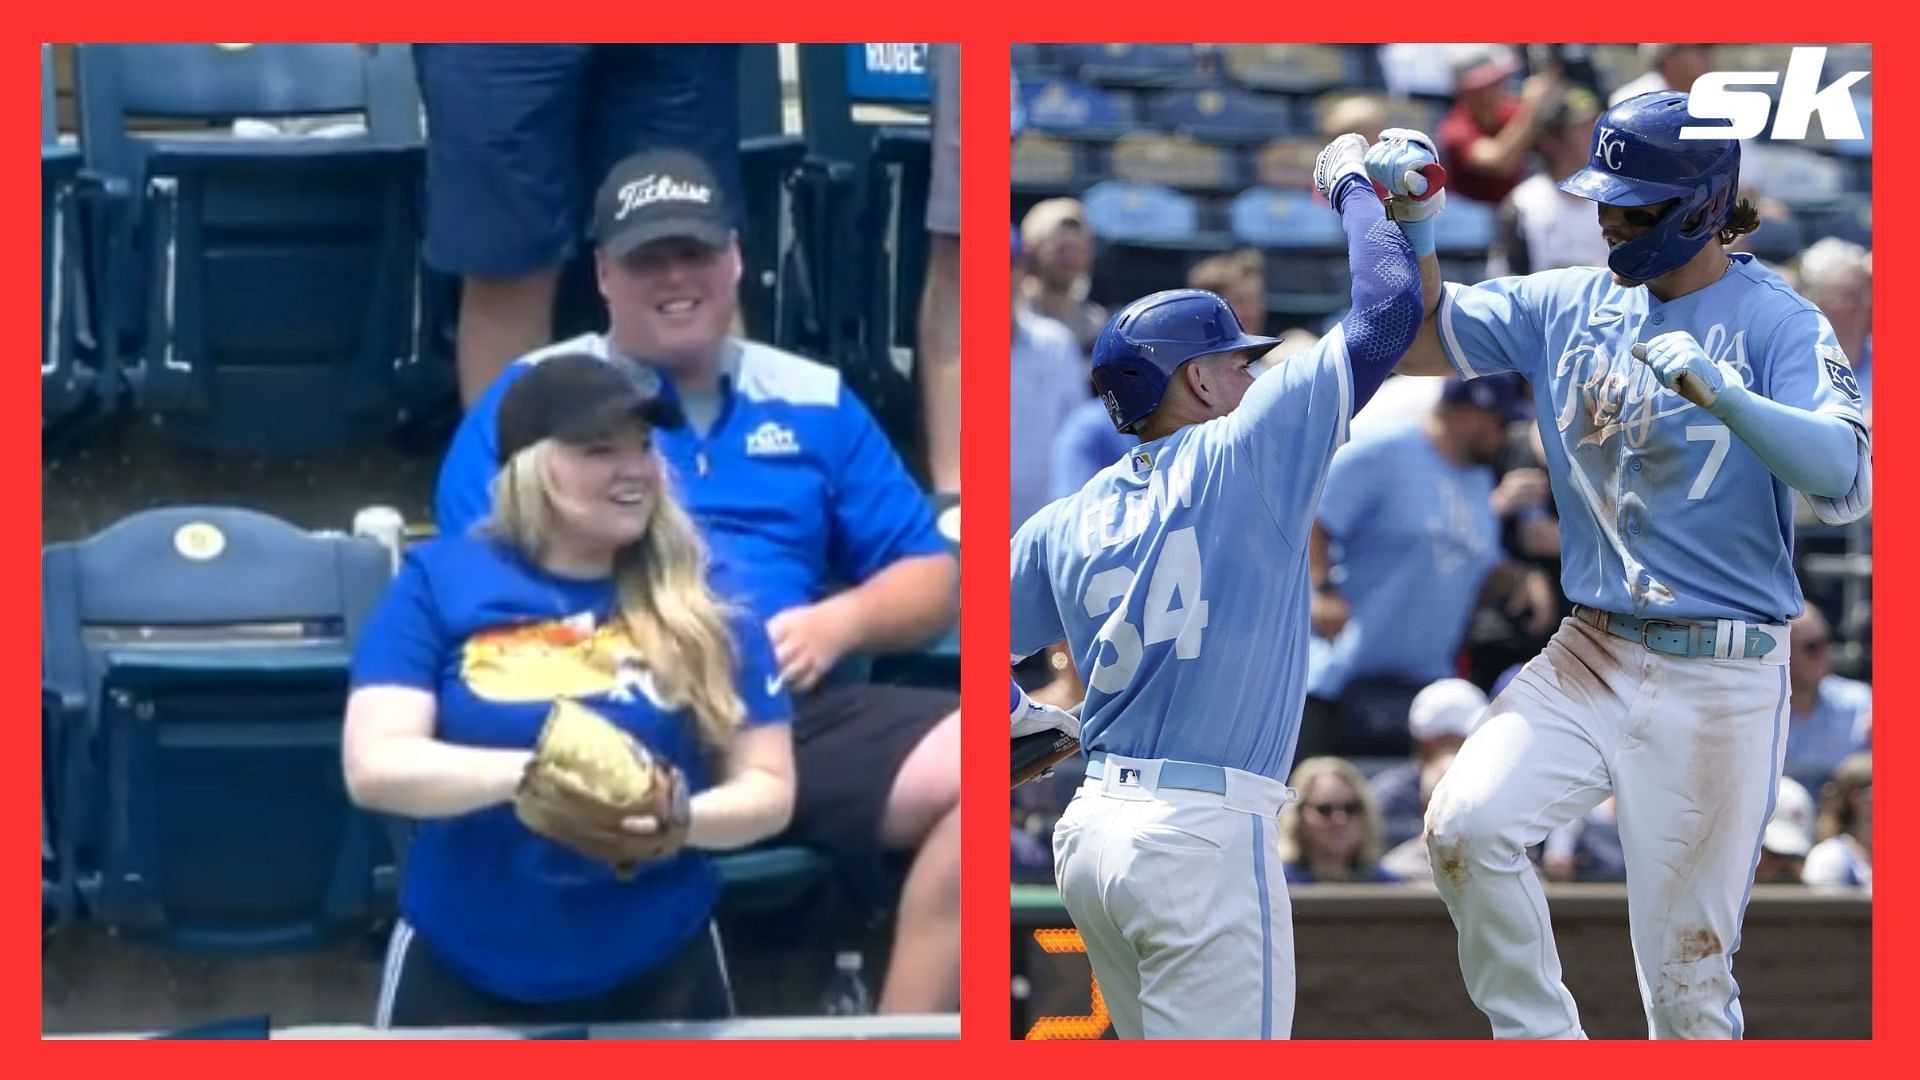 WATCH: Woman and her family get ejected for catching a ball during Royals vs Rays game 